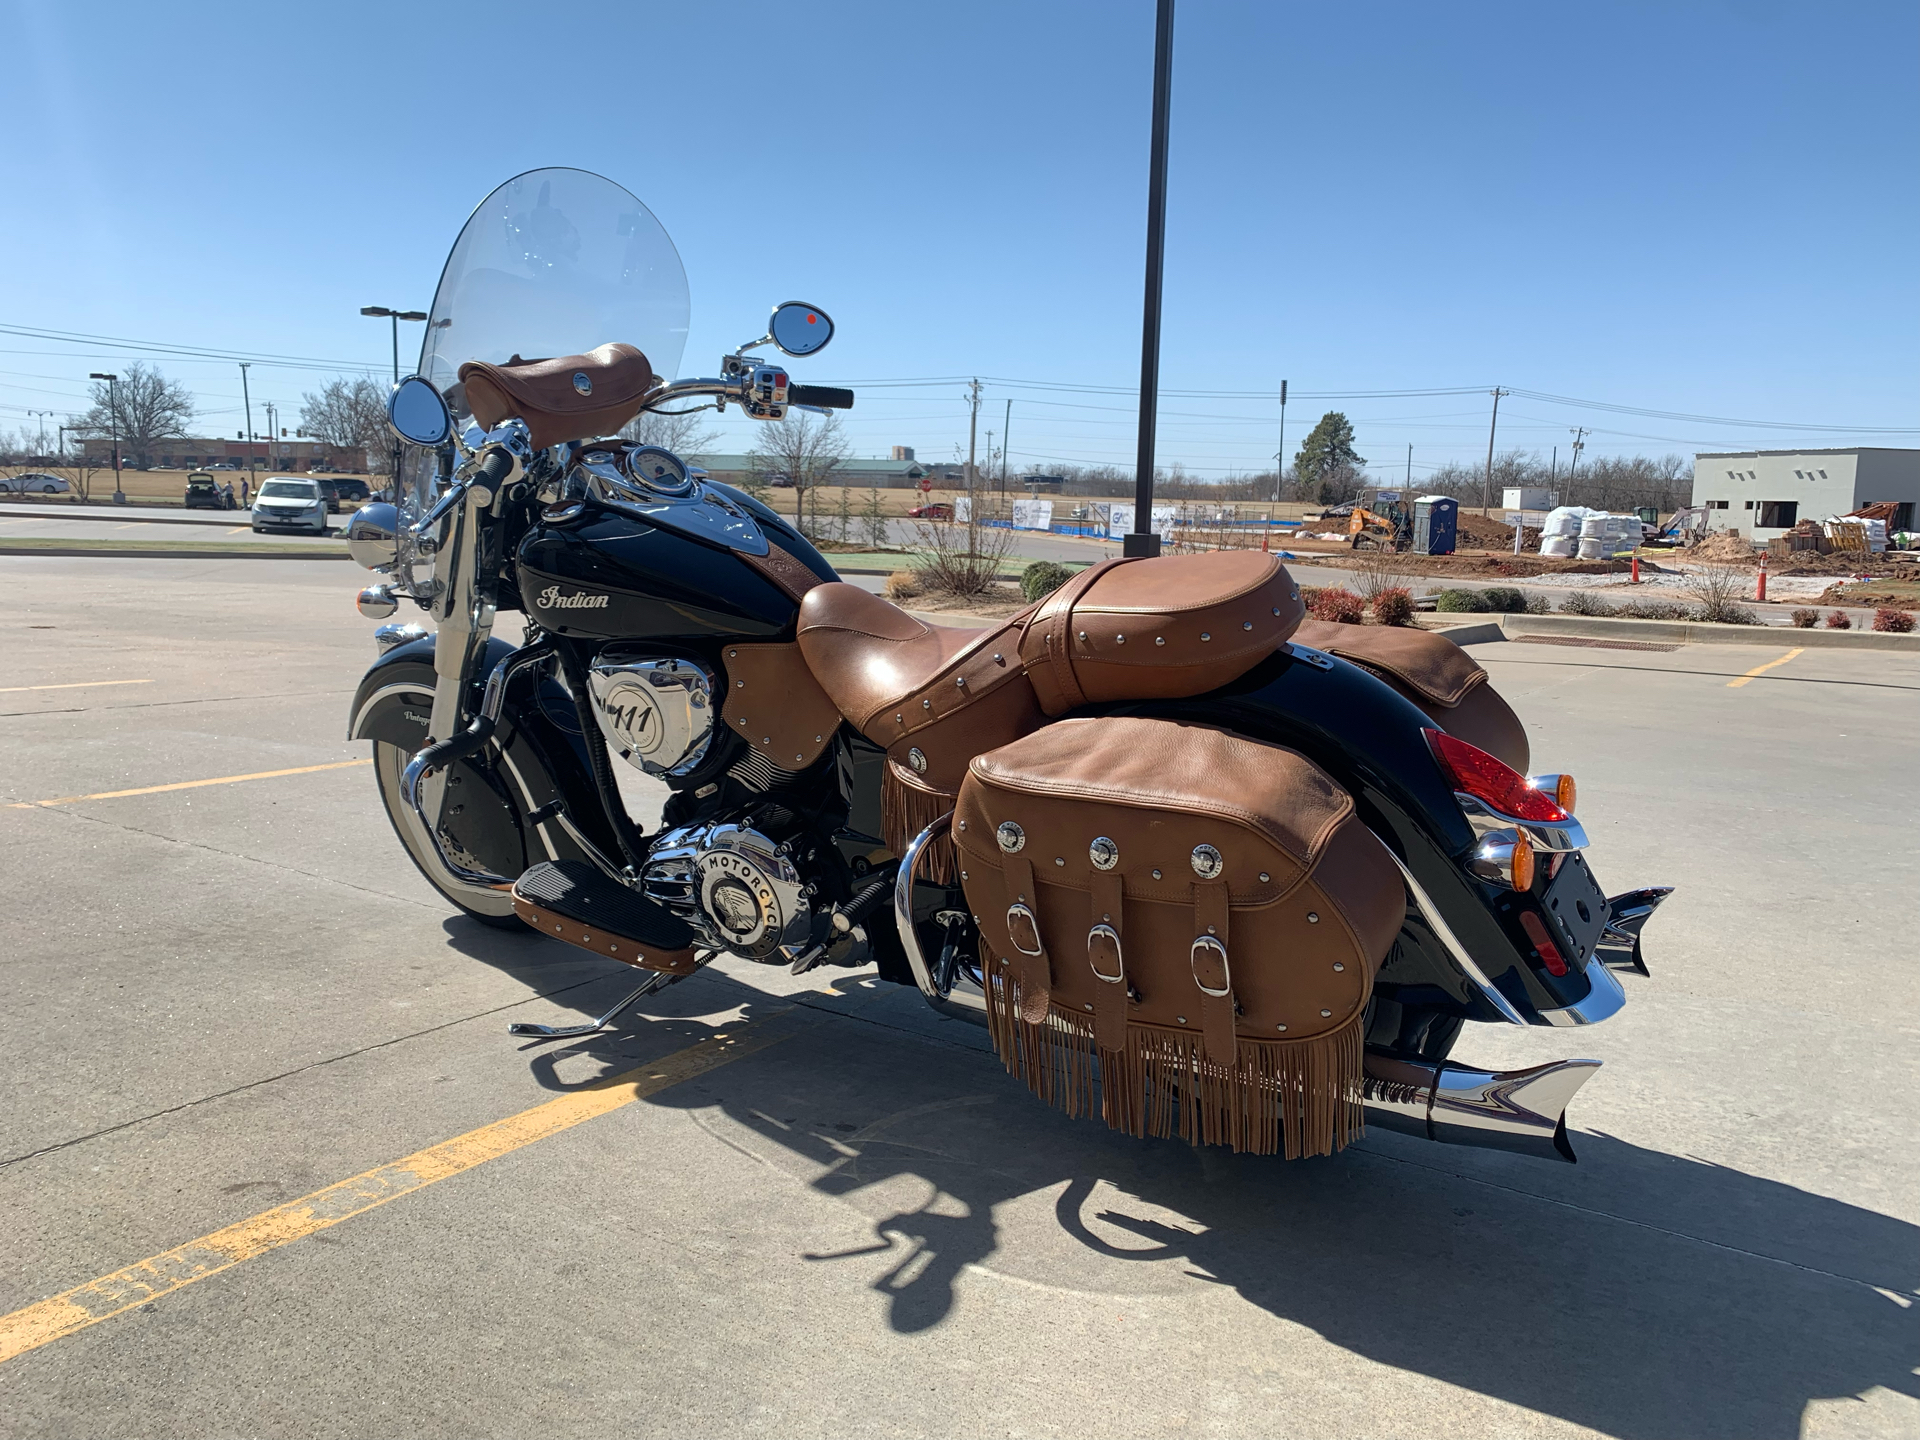 2016 Indian Motorcycle Chief® Vintage in Norman, Oklahoma - Photo 6